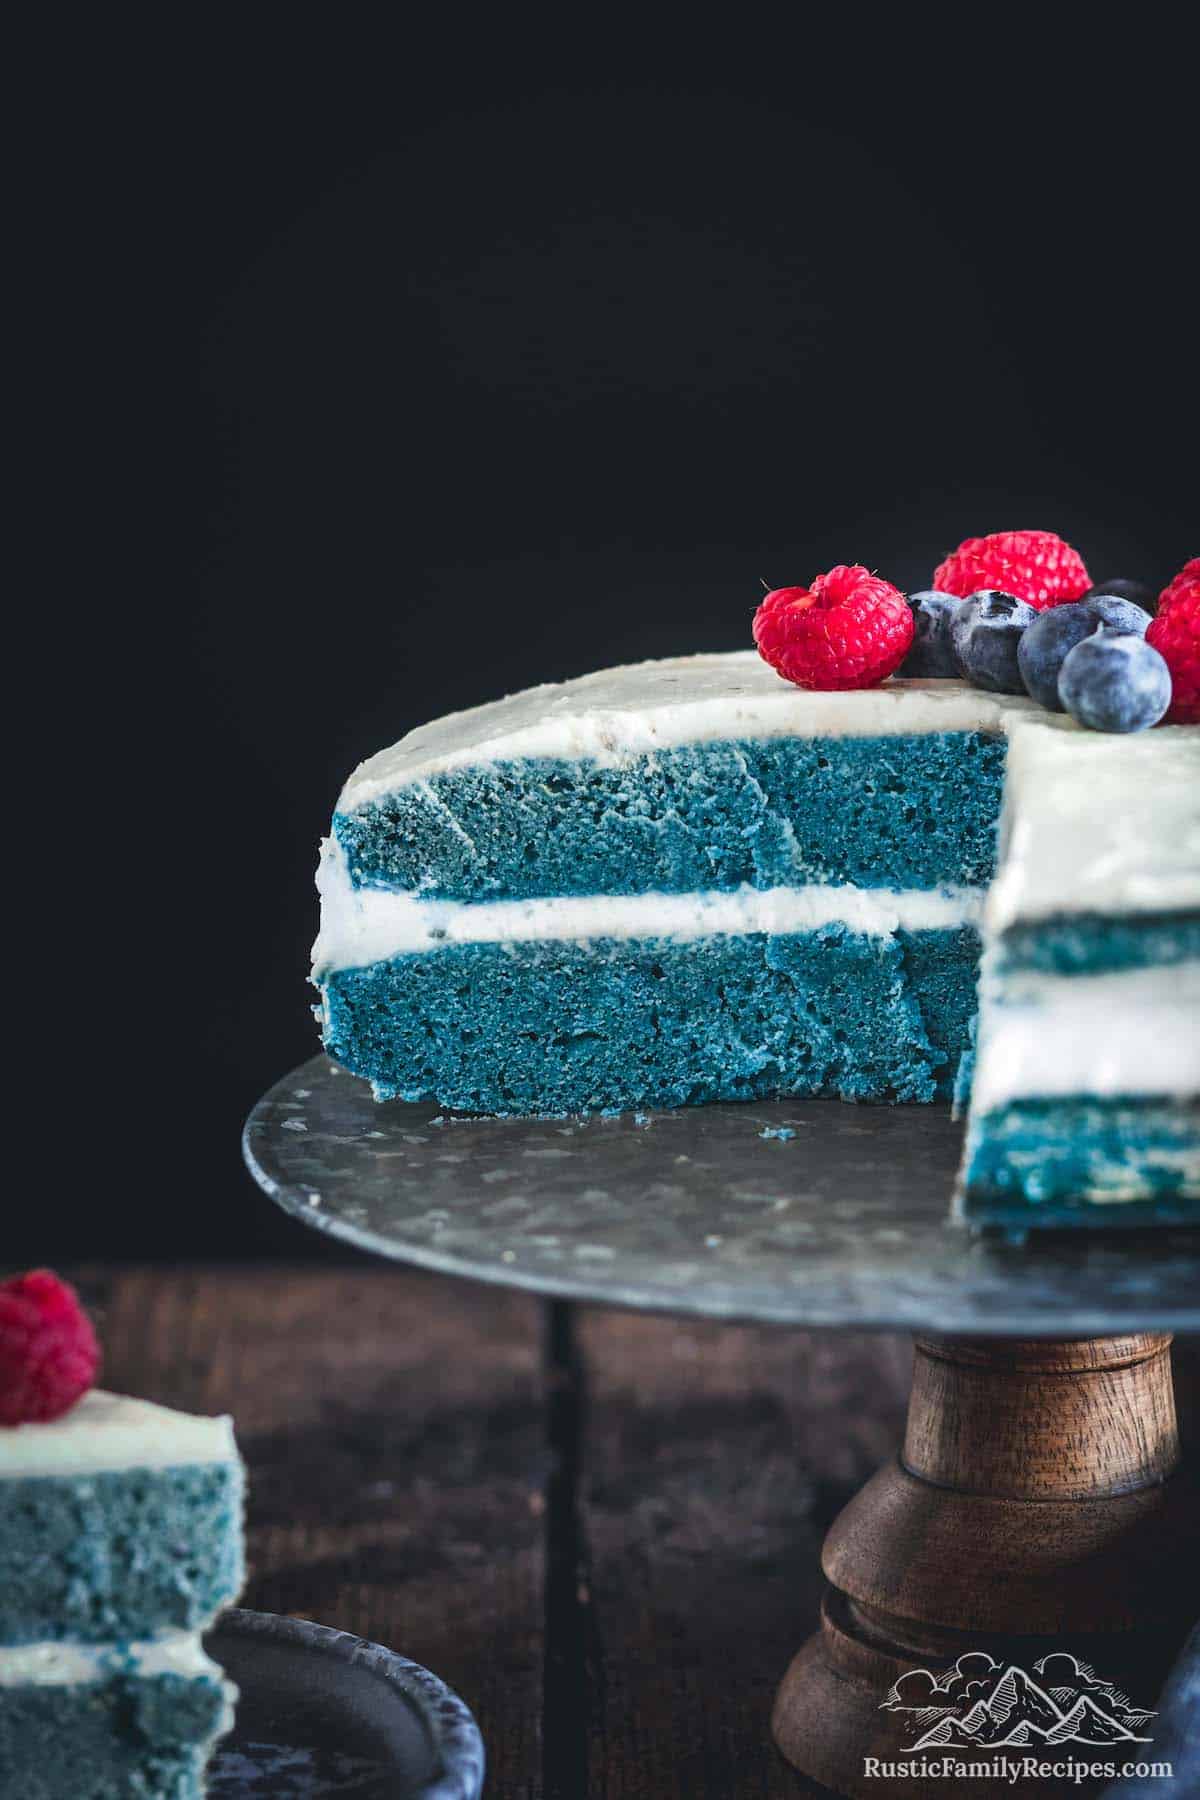 A blue matcha cake sliced open with two layers and frosting